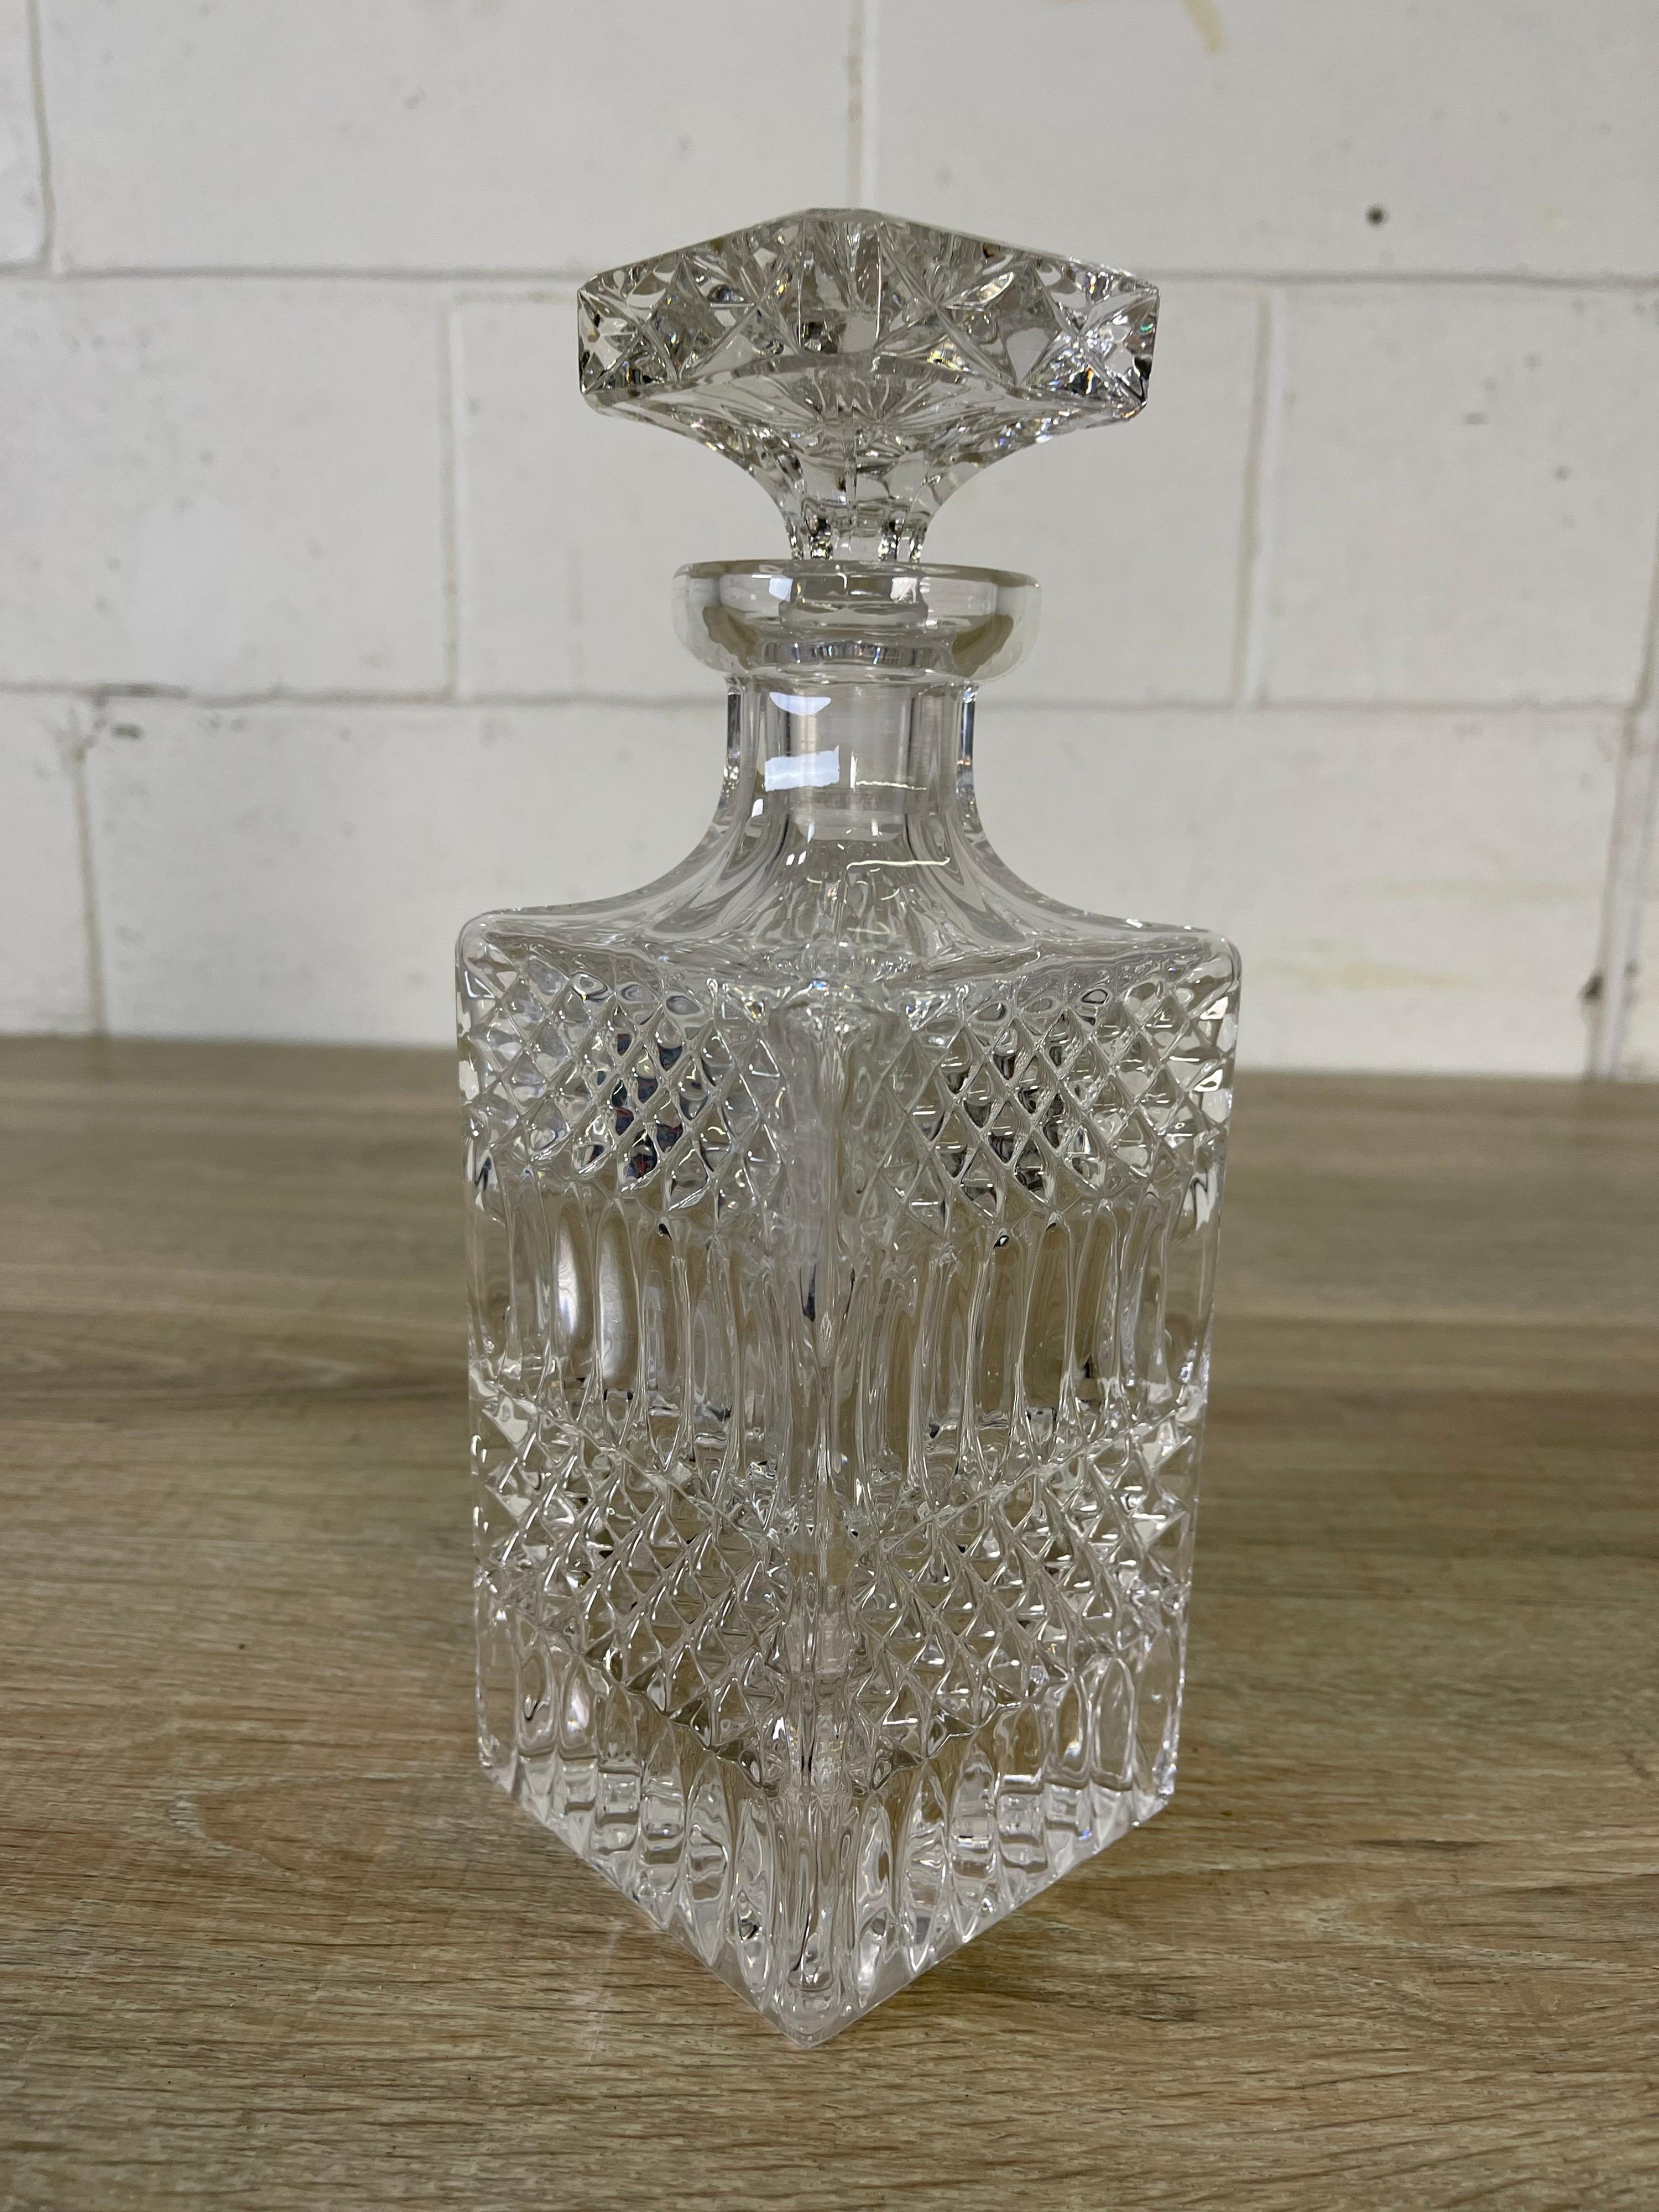 Vintage 1960s handblown square crystal decanter with stopper. The decanter is a heavy glass with no interior stains. No marks.